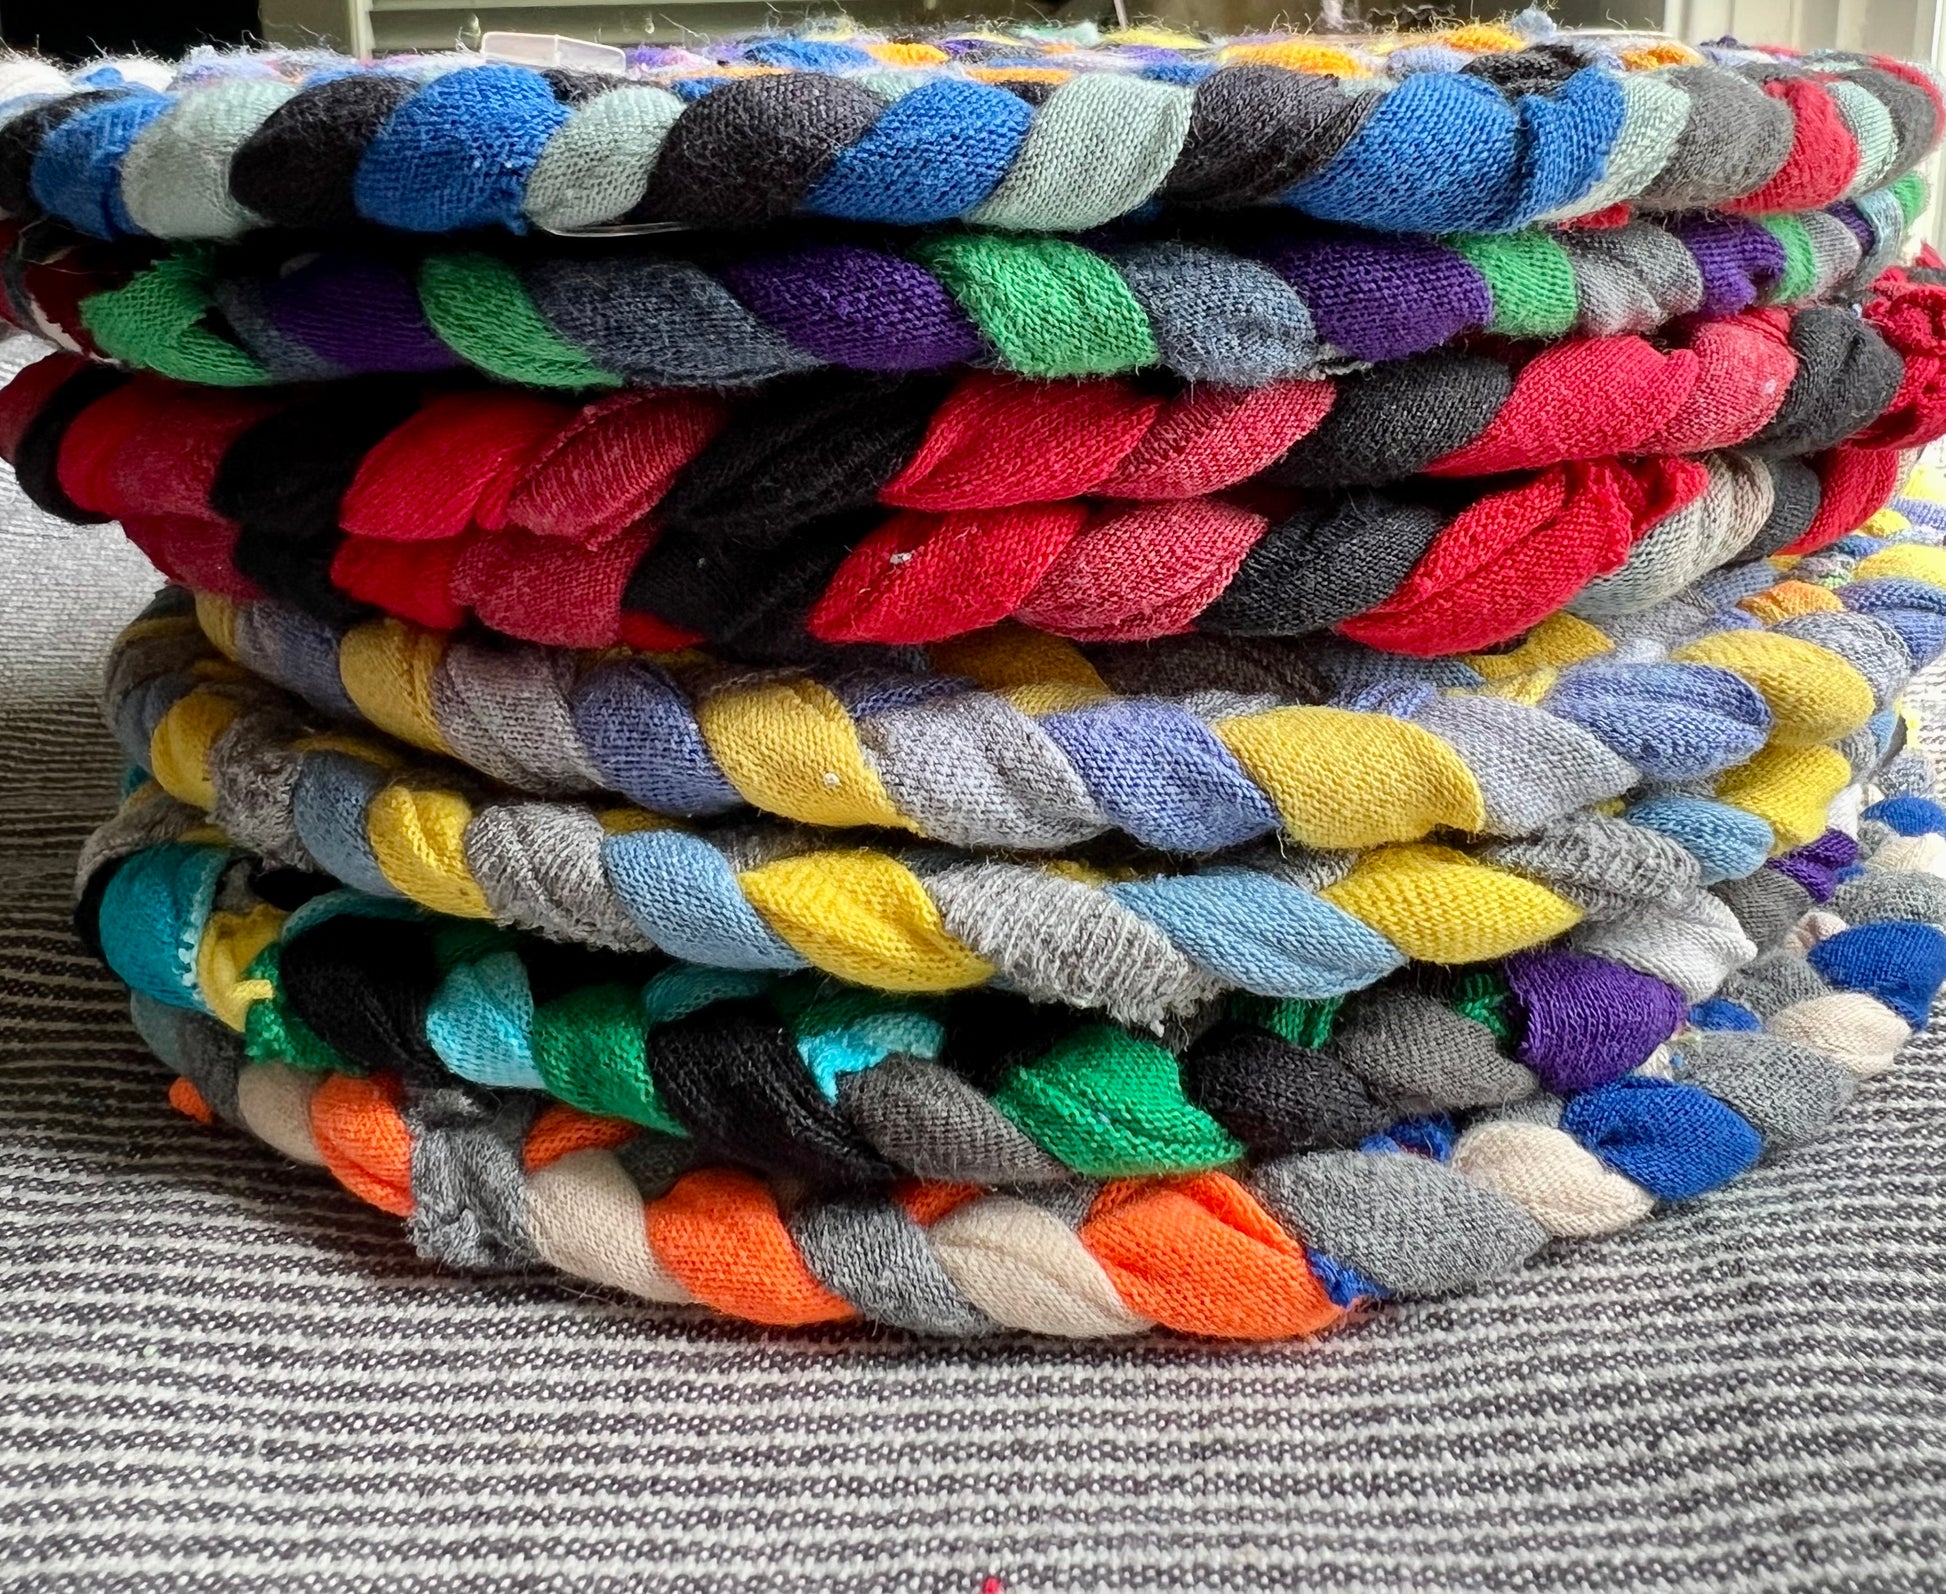 A stack of colorful trivets, side view.